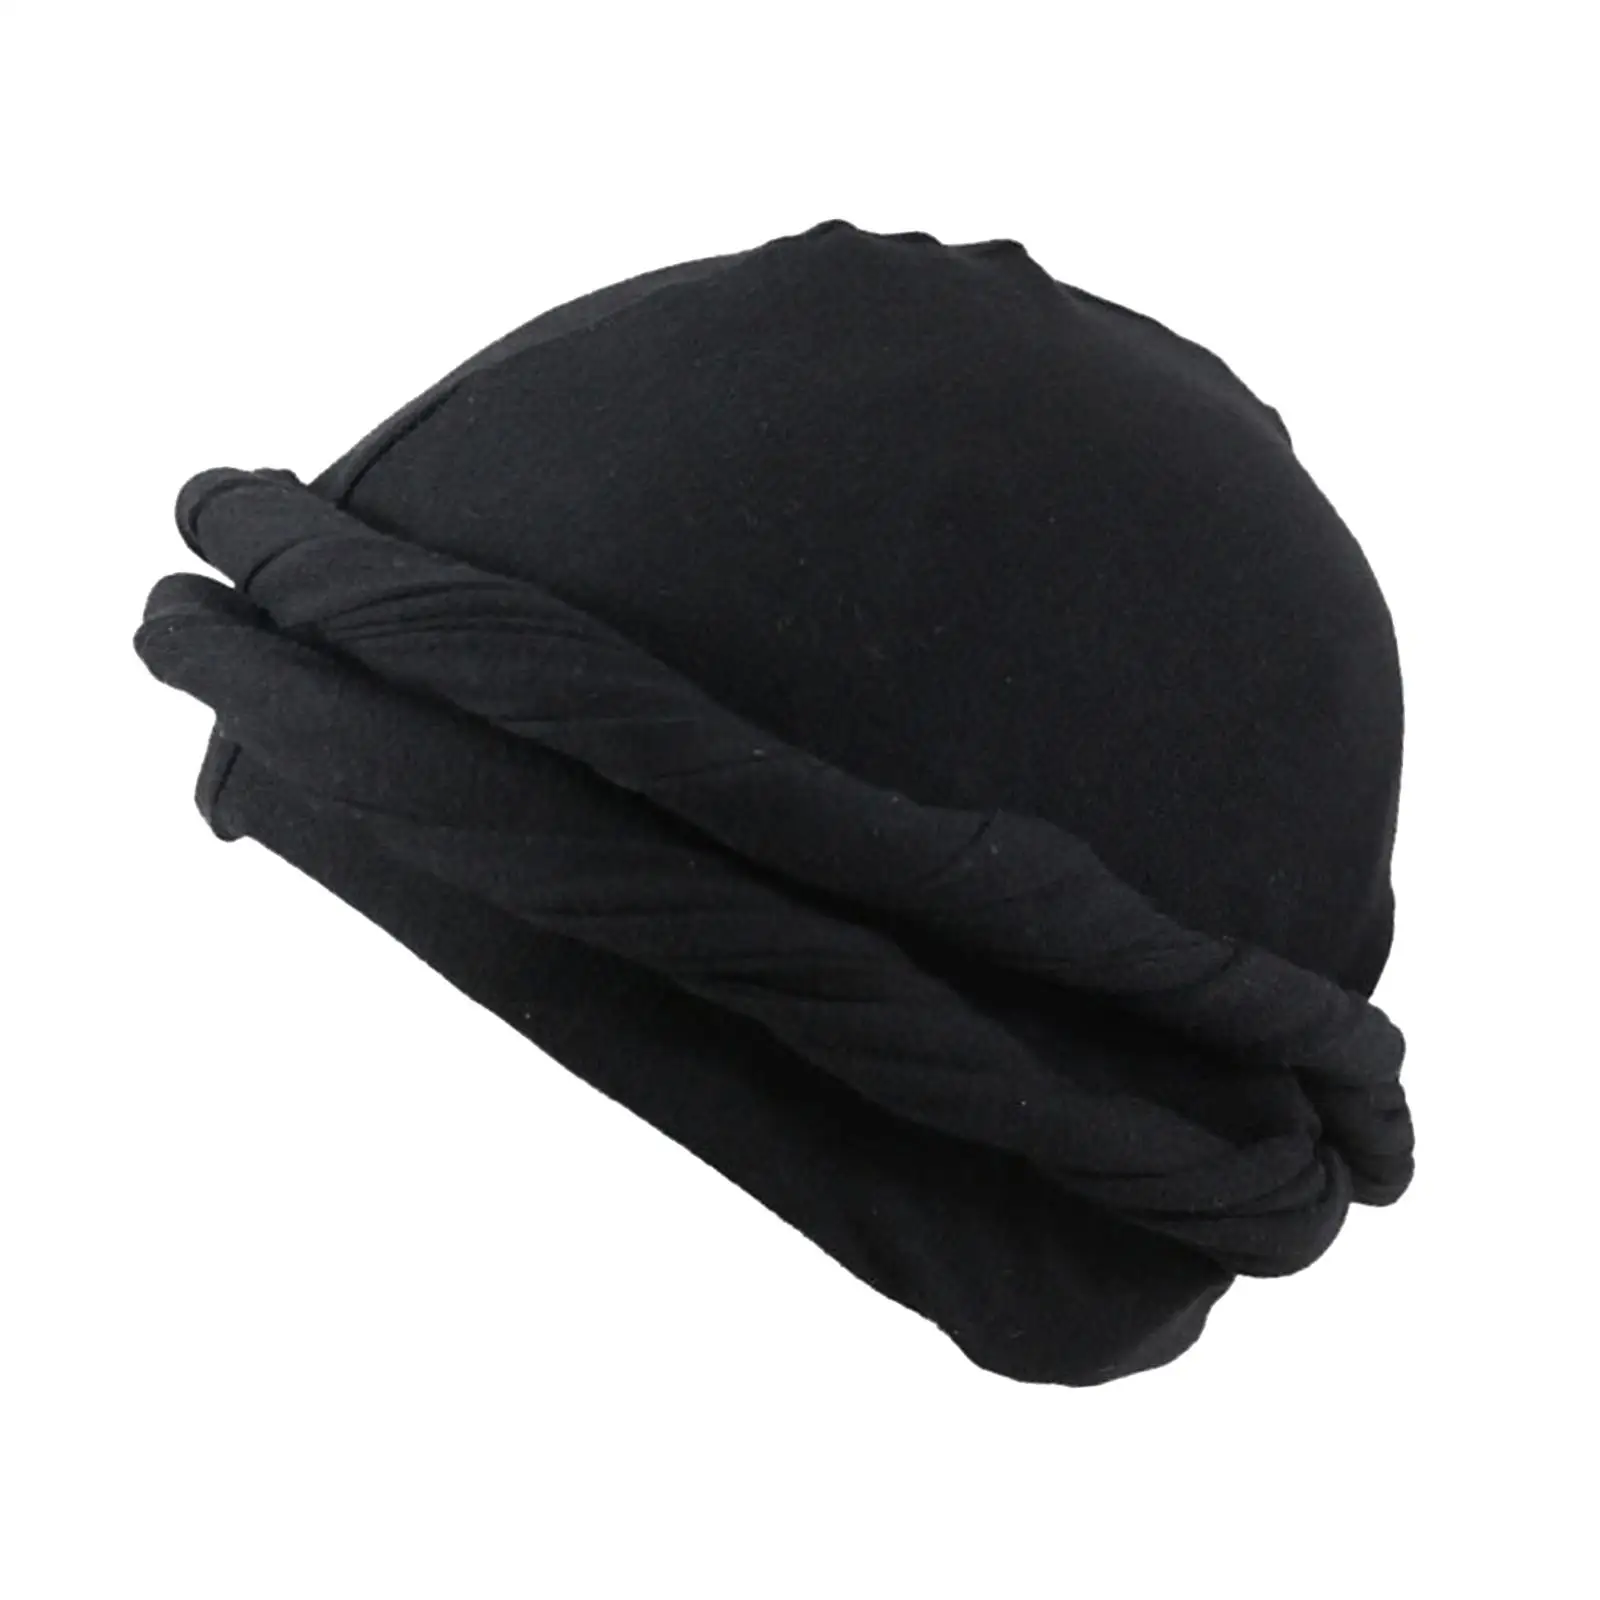 Cycling Hat Headband Hat Headscarf Baggy Skull Hat Warm Pullover Hat Head Cover Lightweight Beanie for Climbing Daily